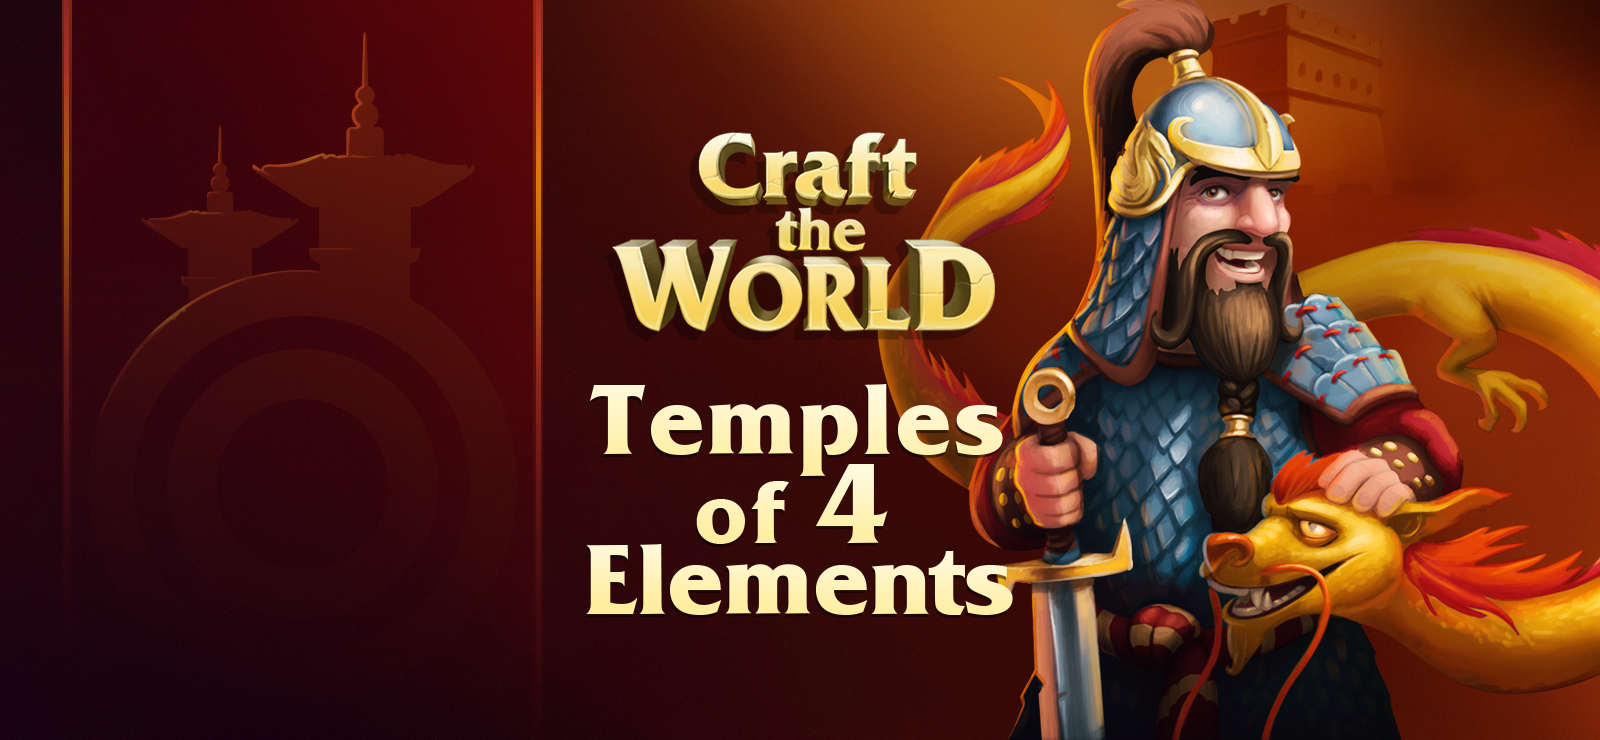 Craft The World - Temples Of 4 Elements